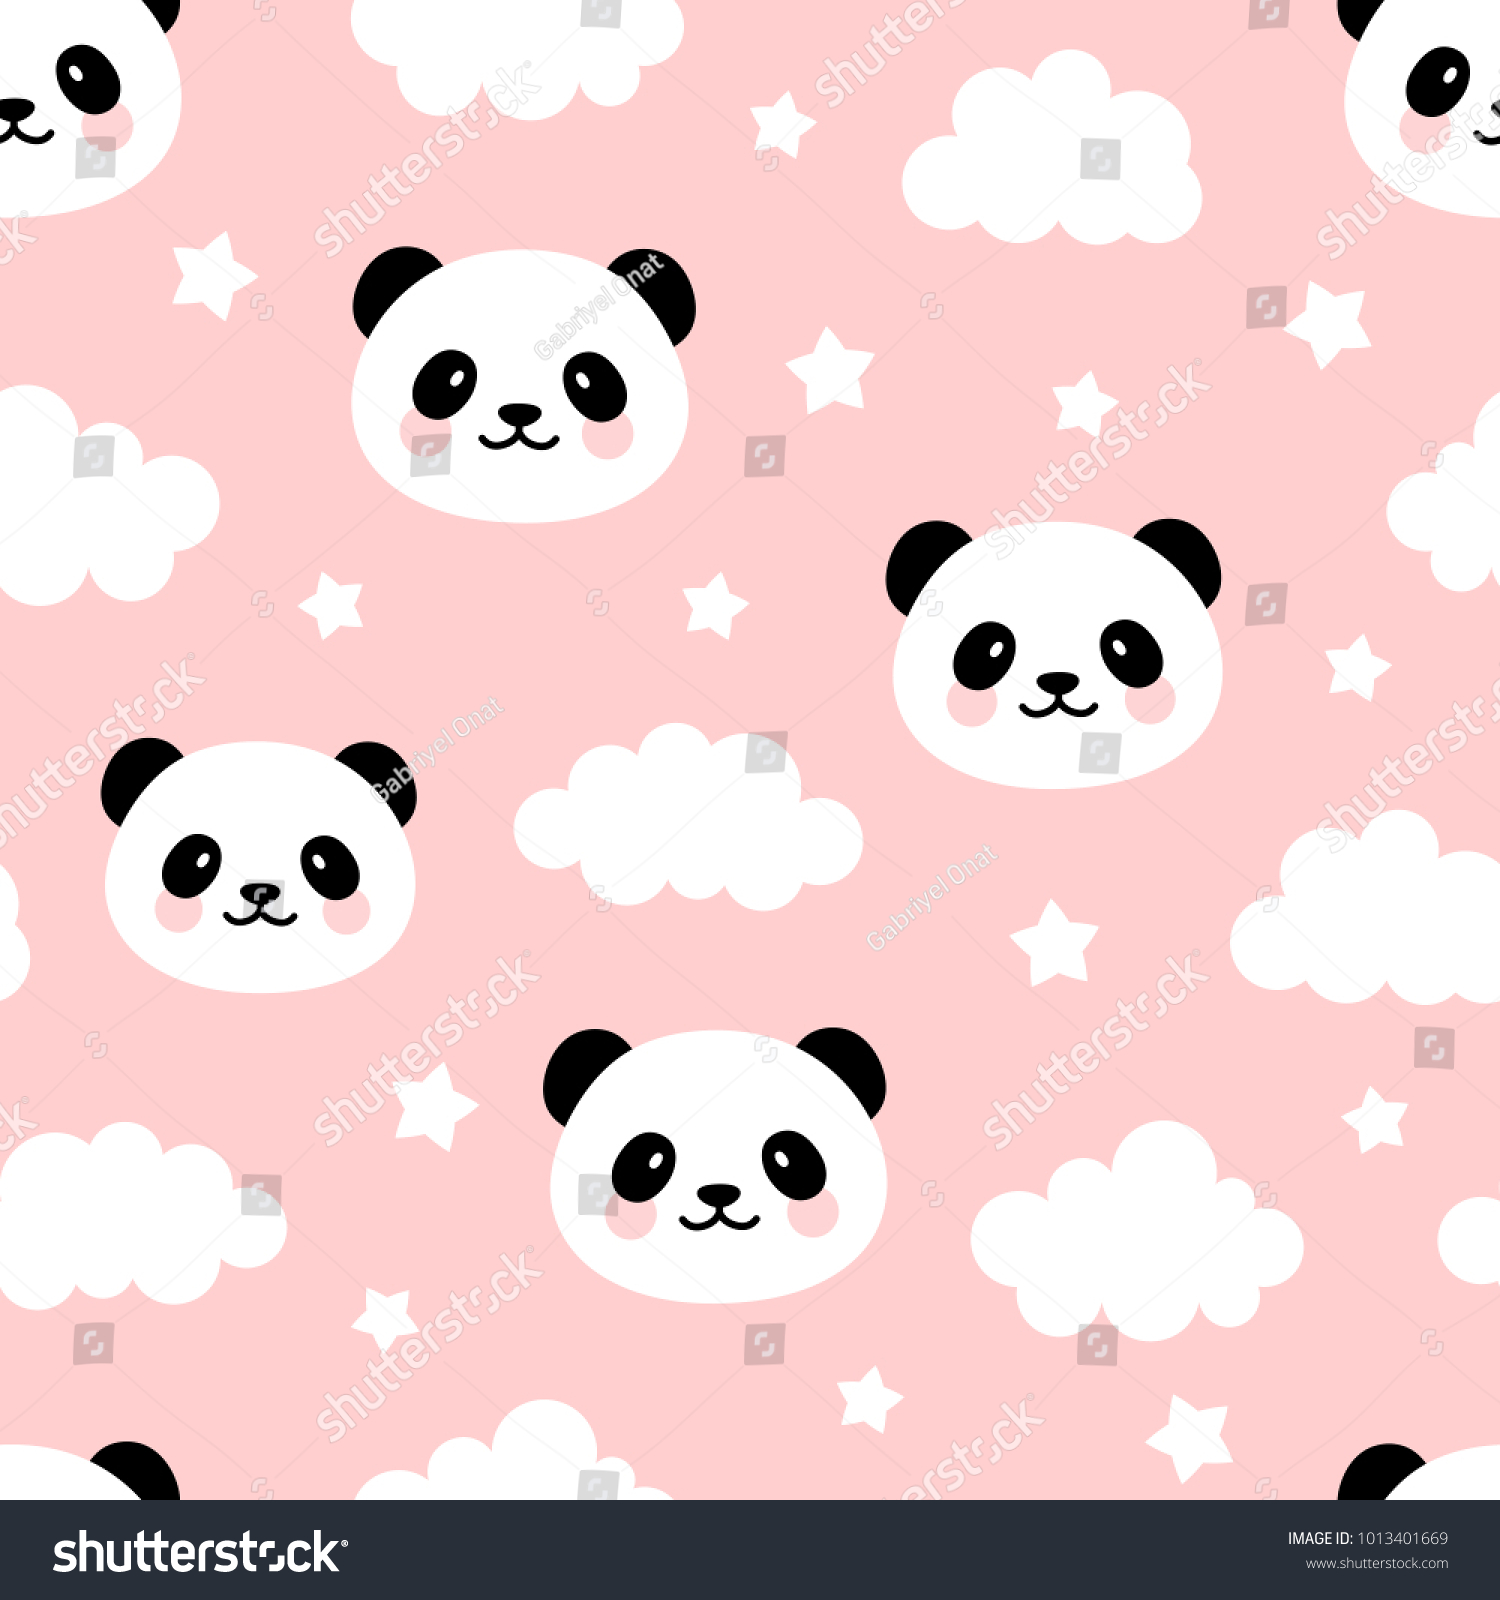 SVG of Cute Panda Seamless Pattern, Animal Background with Clouds for Kids svg